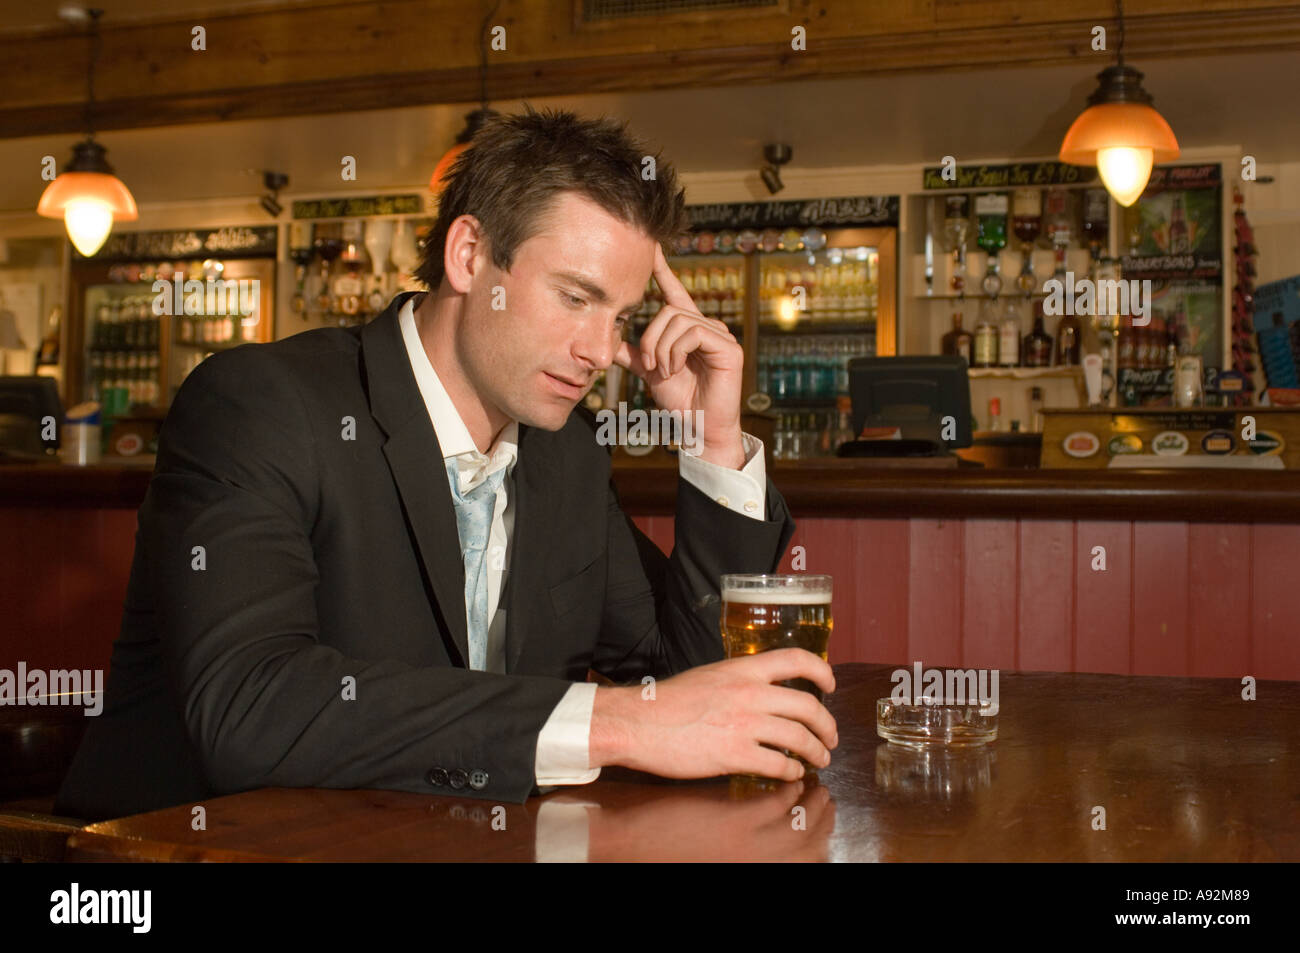 man having a pint in a pub looking thoughtful Stock Photo - Alamy